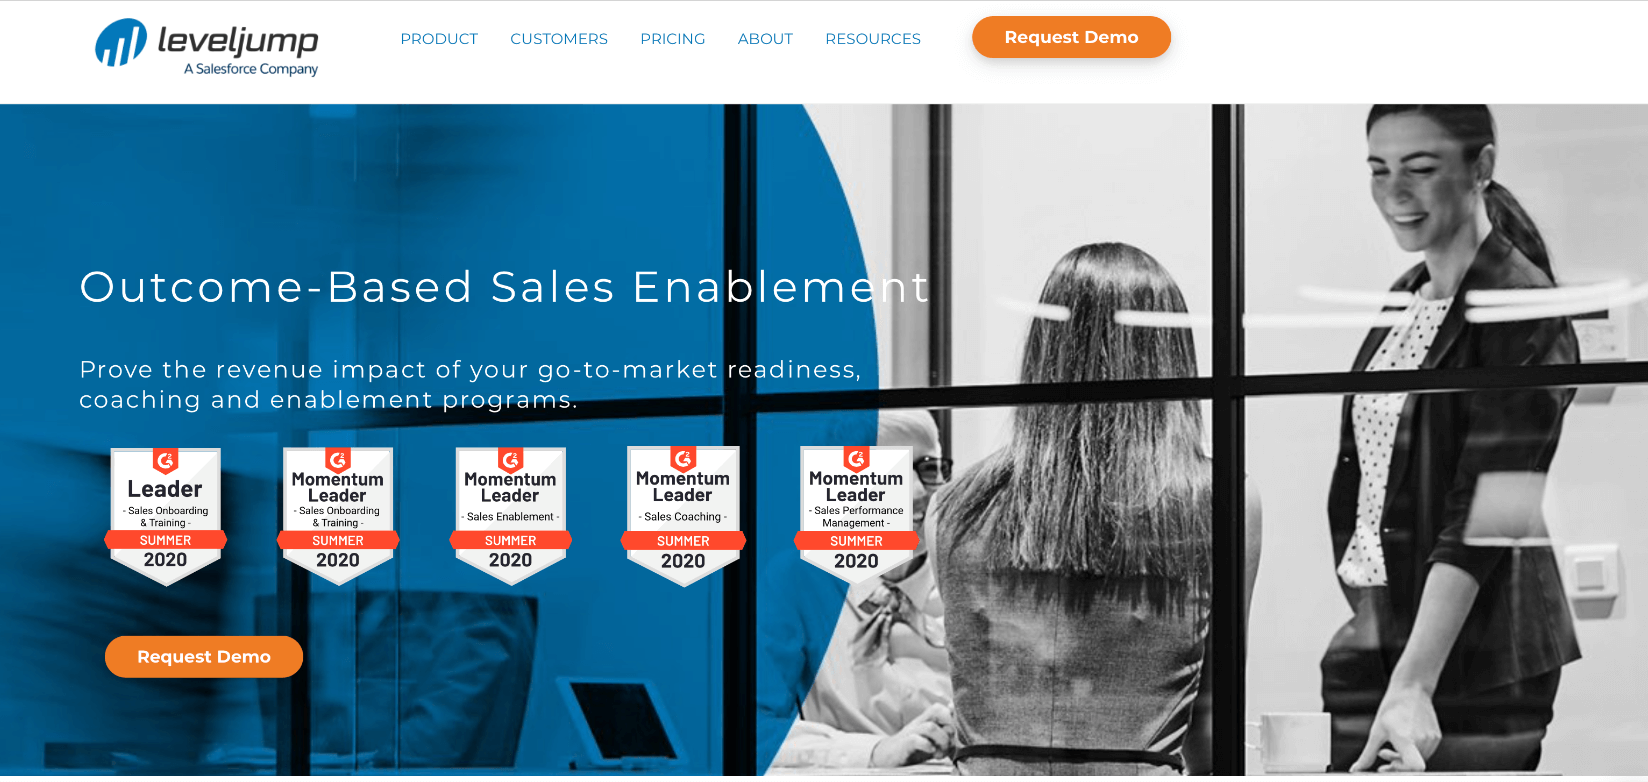 LevelJump homepage: Outcome-Based Sales Enablement